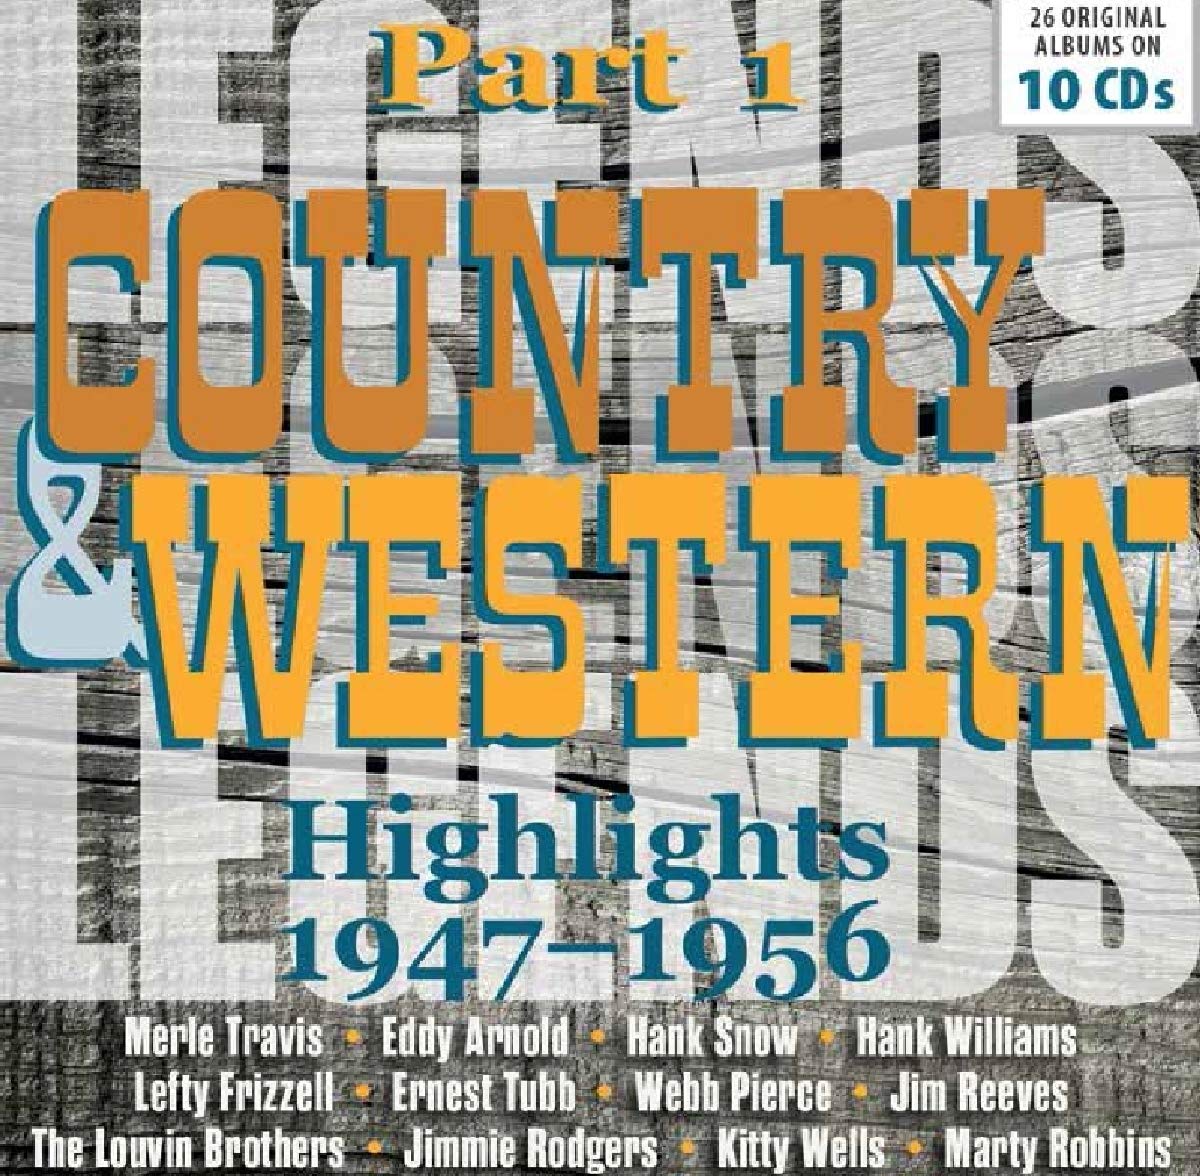 COUNTRY & WESTERN HIGHLIGHTS 1947-1956 (26 ORIGINAL ALBUMS, 10 CDS)